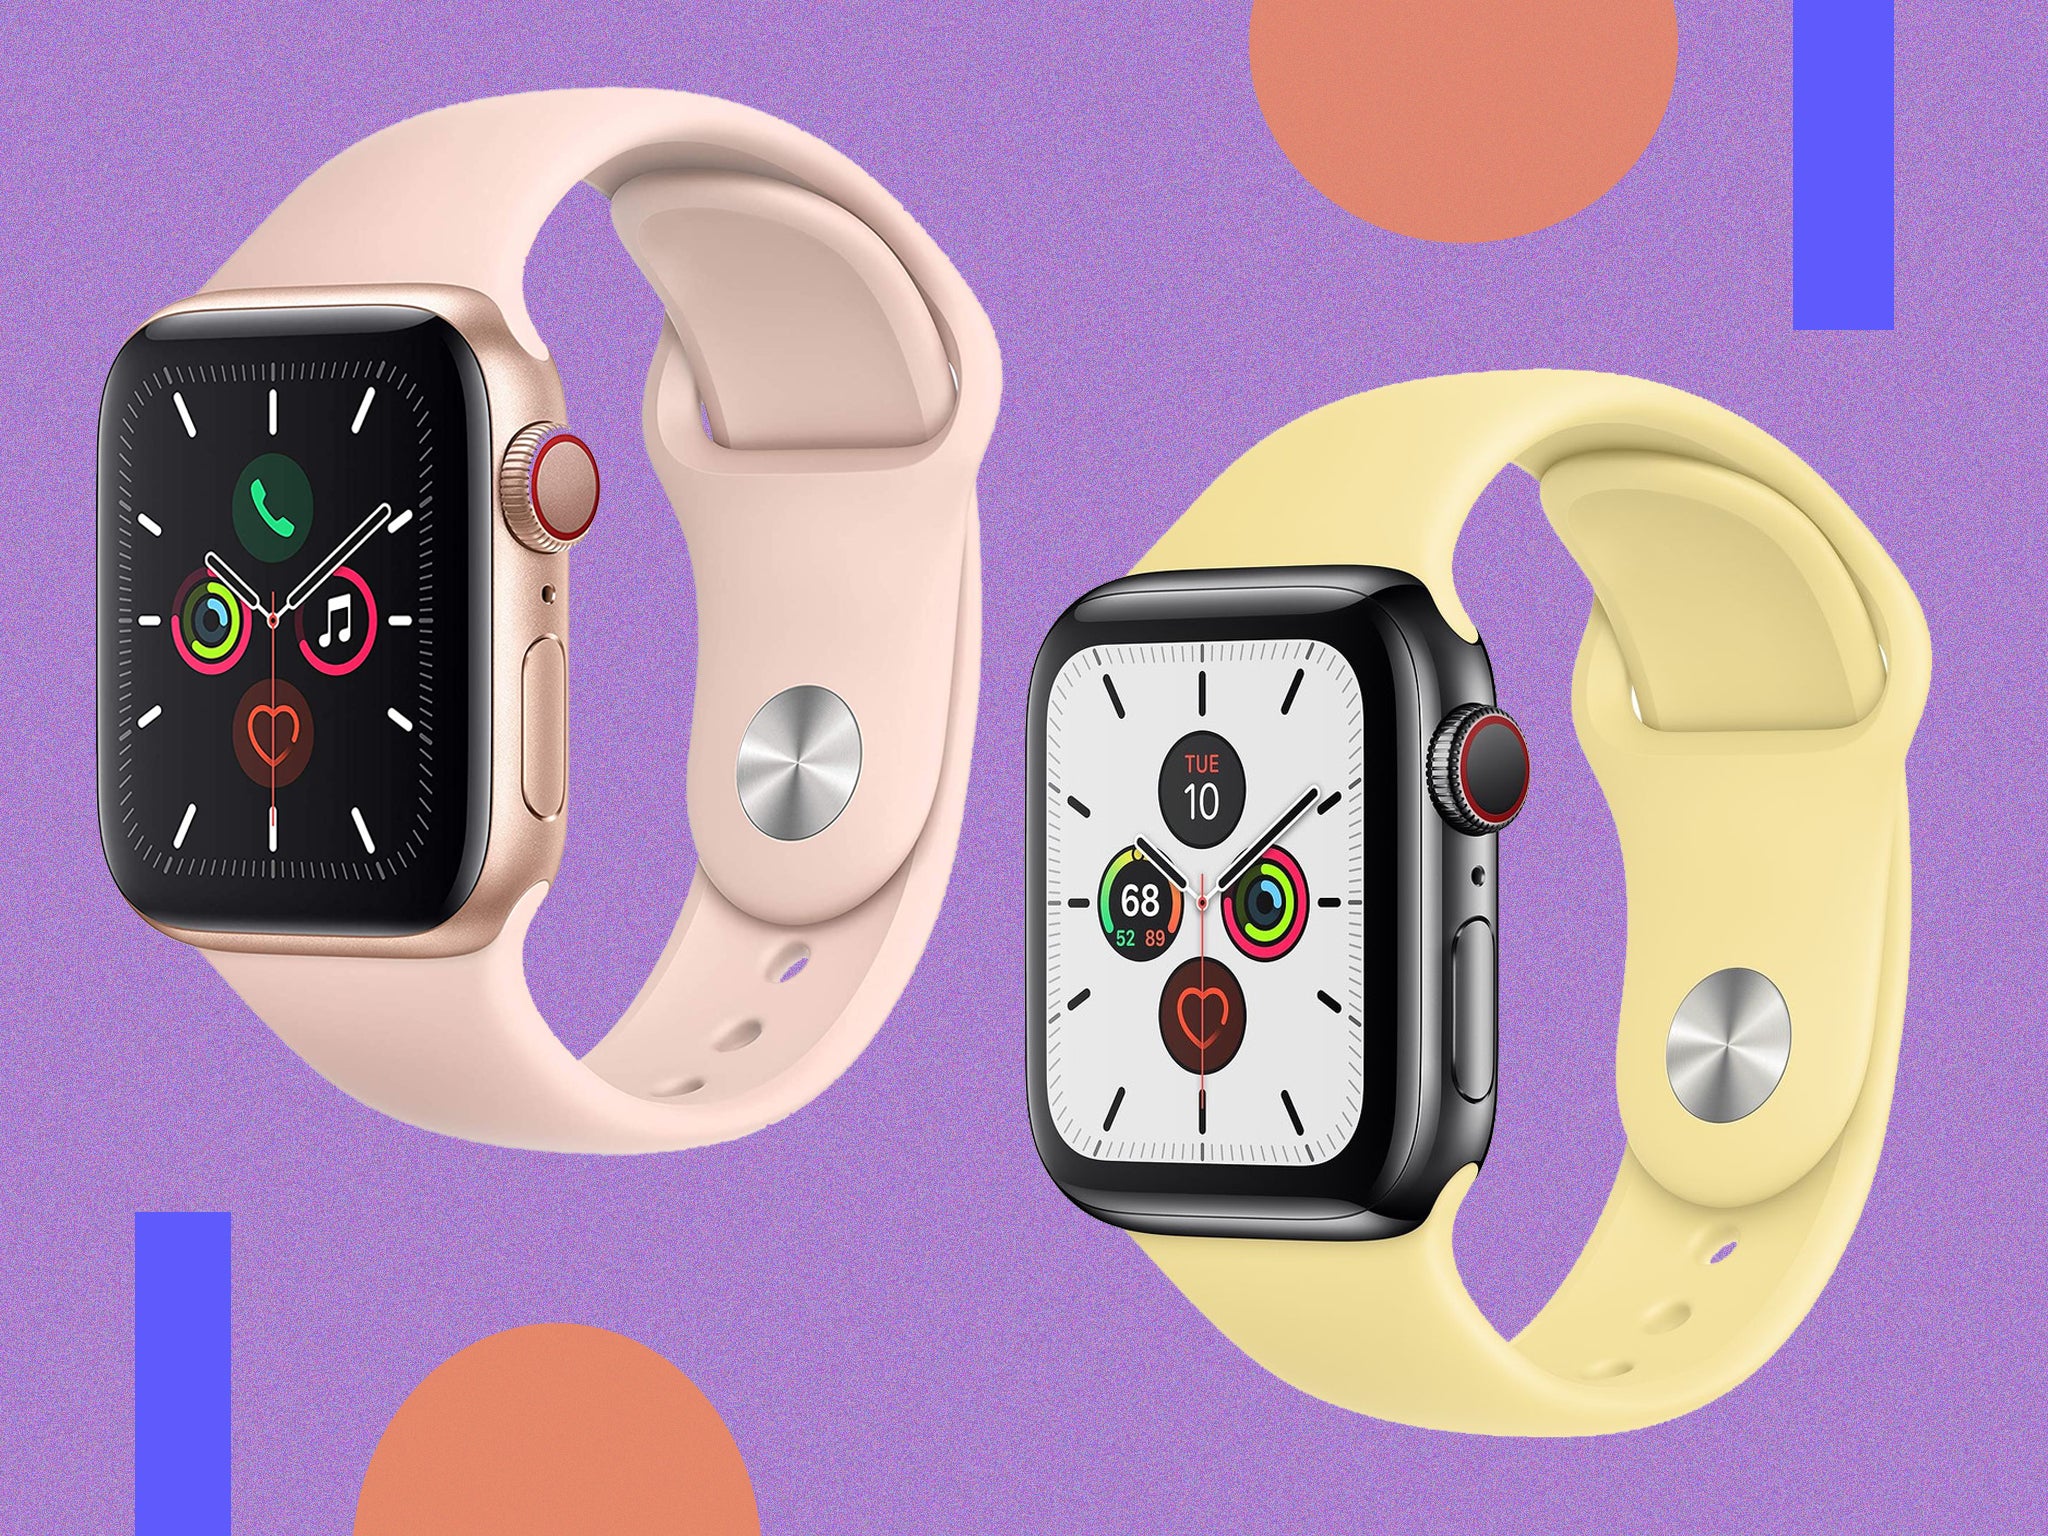 Apple Watch Series 5 Black Friday deal: Save 23% in Amazon’s sale | The Independent